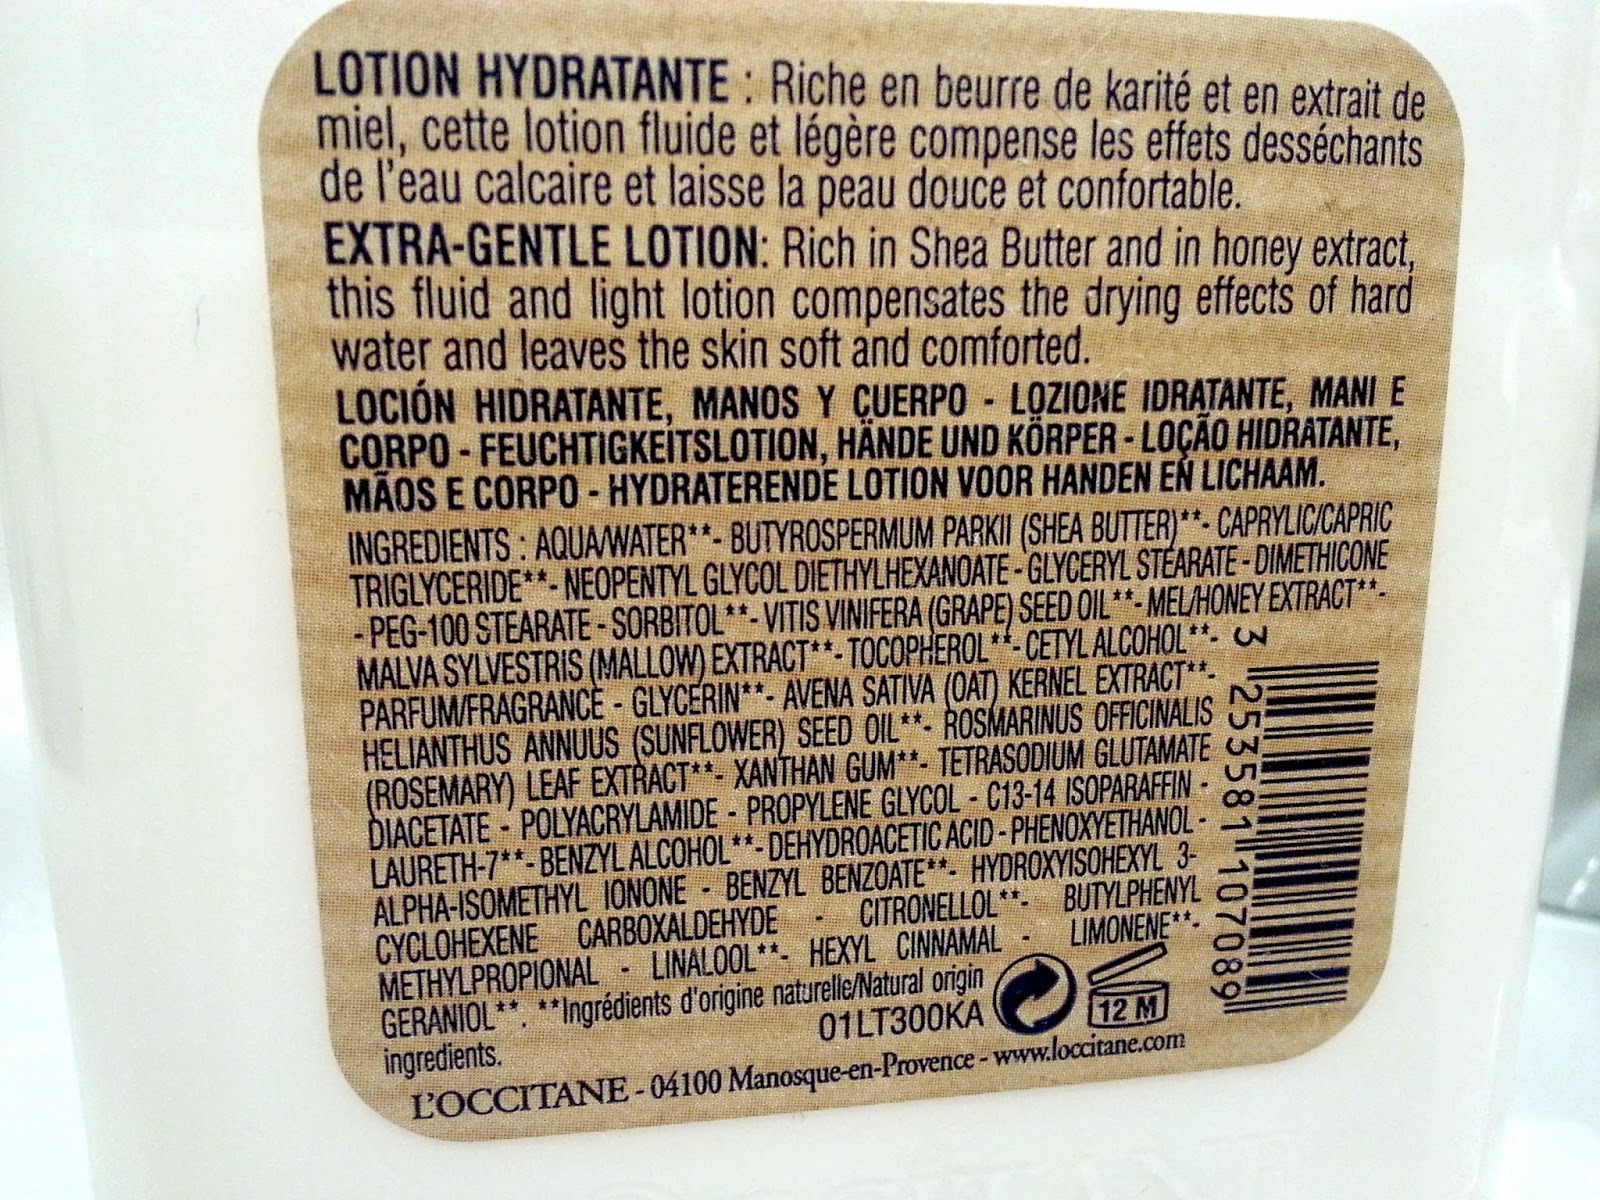 L'Occitane Extra Gentle Shea Butter Lotion For Hands & Body Review Ingredients